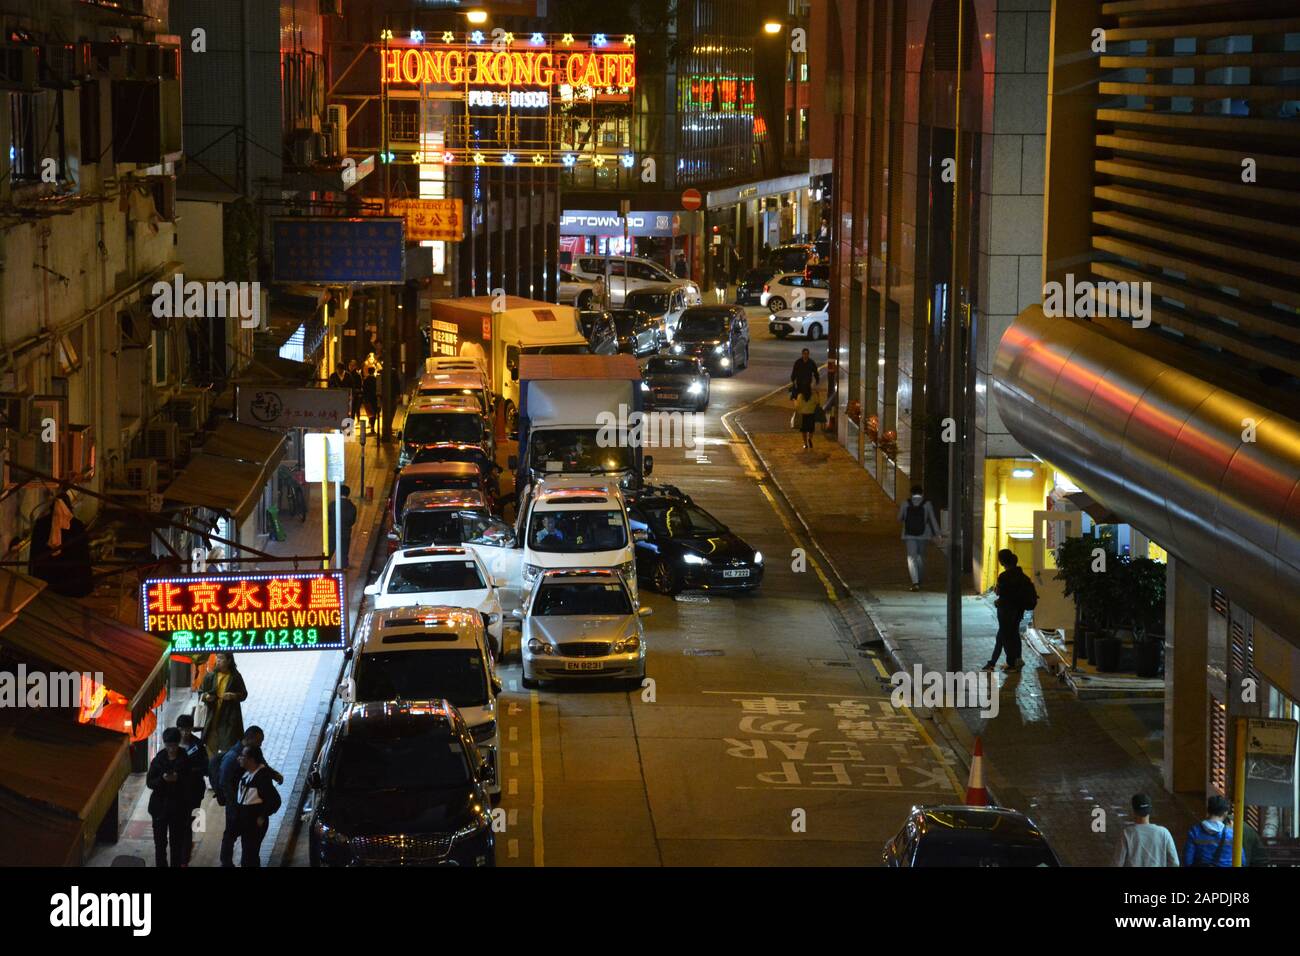 Looking down at traffic and pedestrians on Jaffe Road after dark in the trendy Wan Chai neighborhood of Hong Kong. Stock Photo